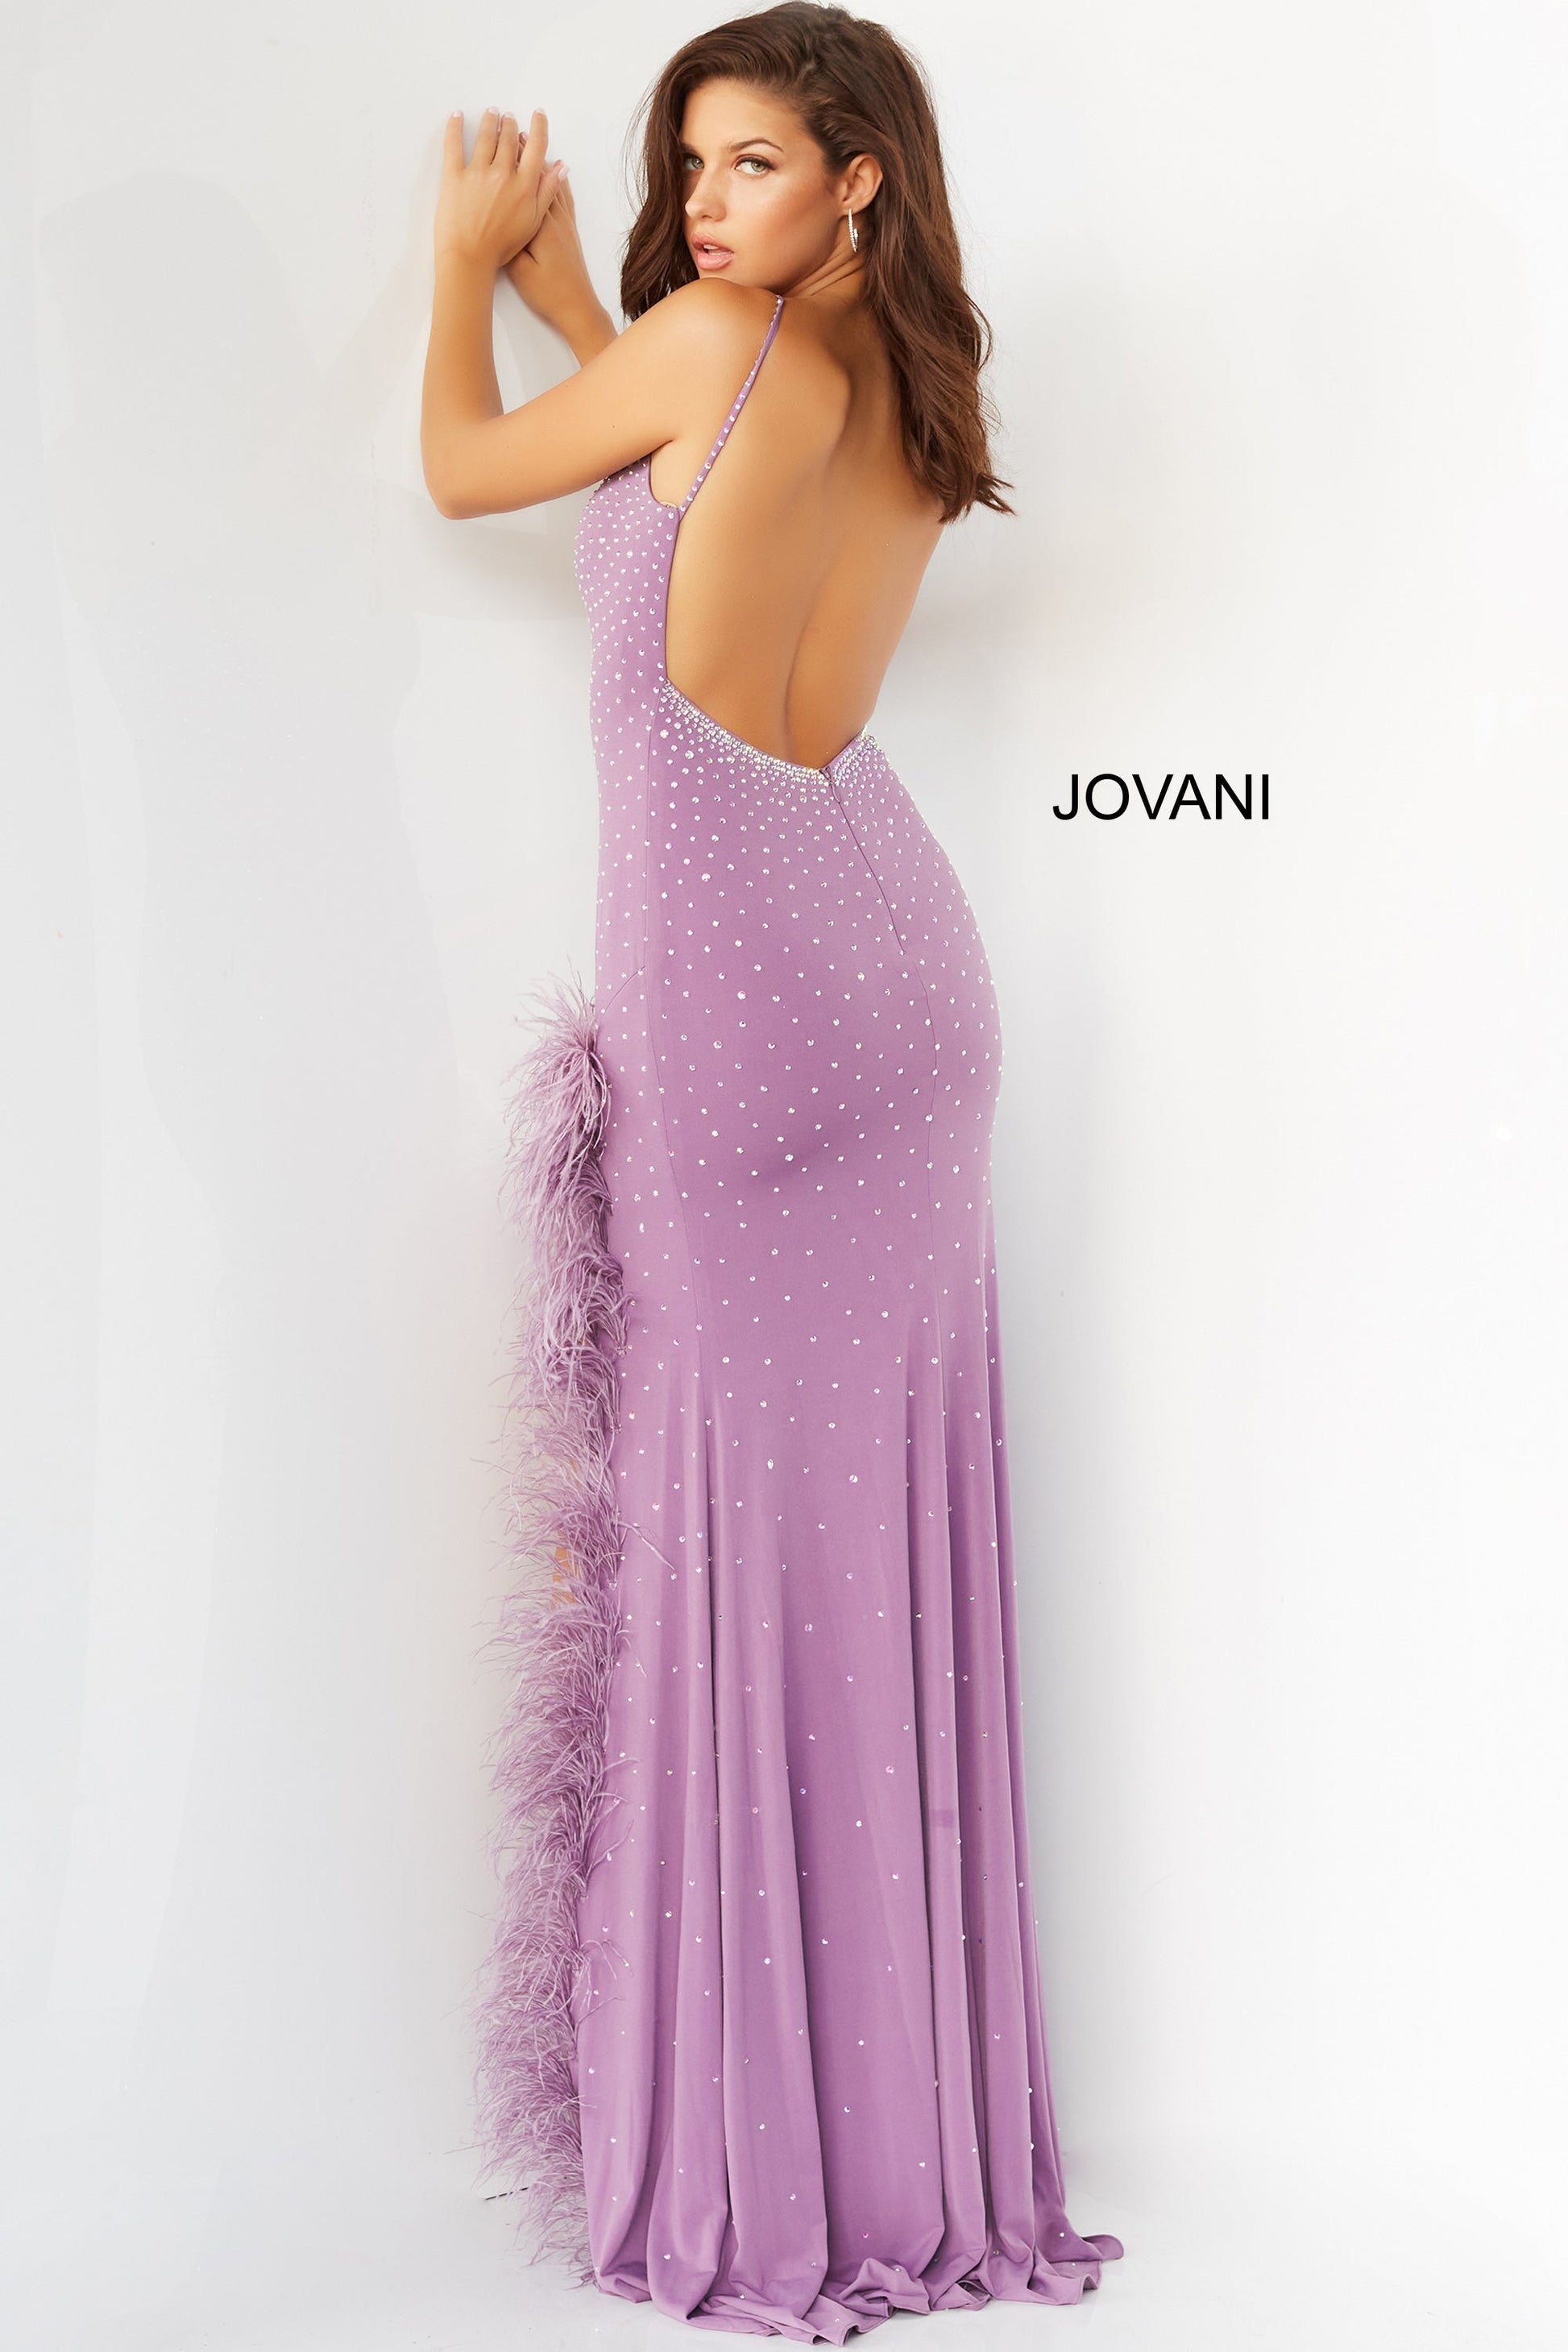 Jovani 08283  Prom, Pageant and Formal Evening Wear Dress.  This extravagant evening gown has a v neckline and low back.  It is fitted and beaded with a feather trimmed slit. Make a statement in this stand out prom dress lilac back